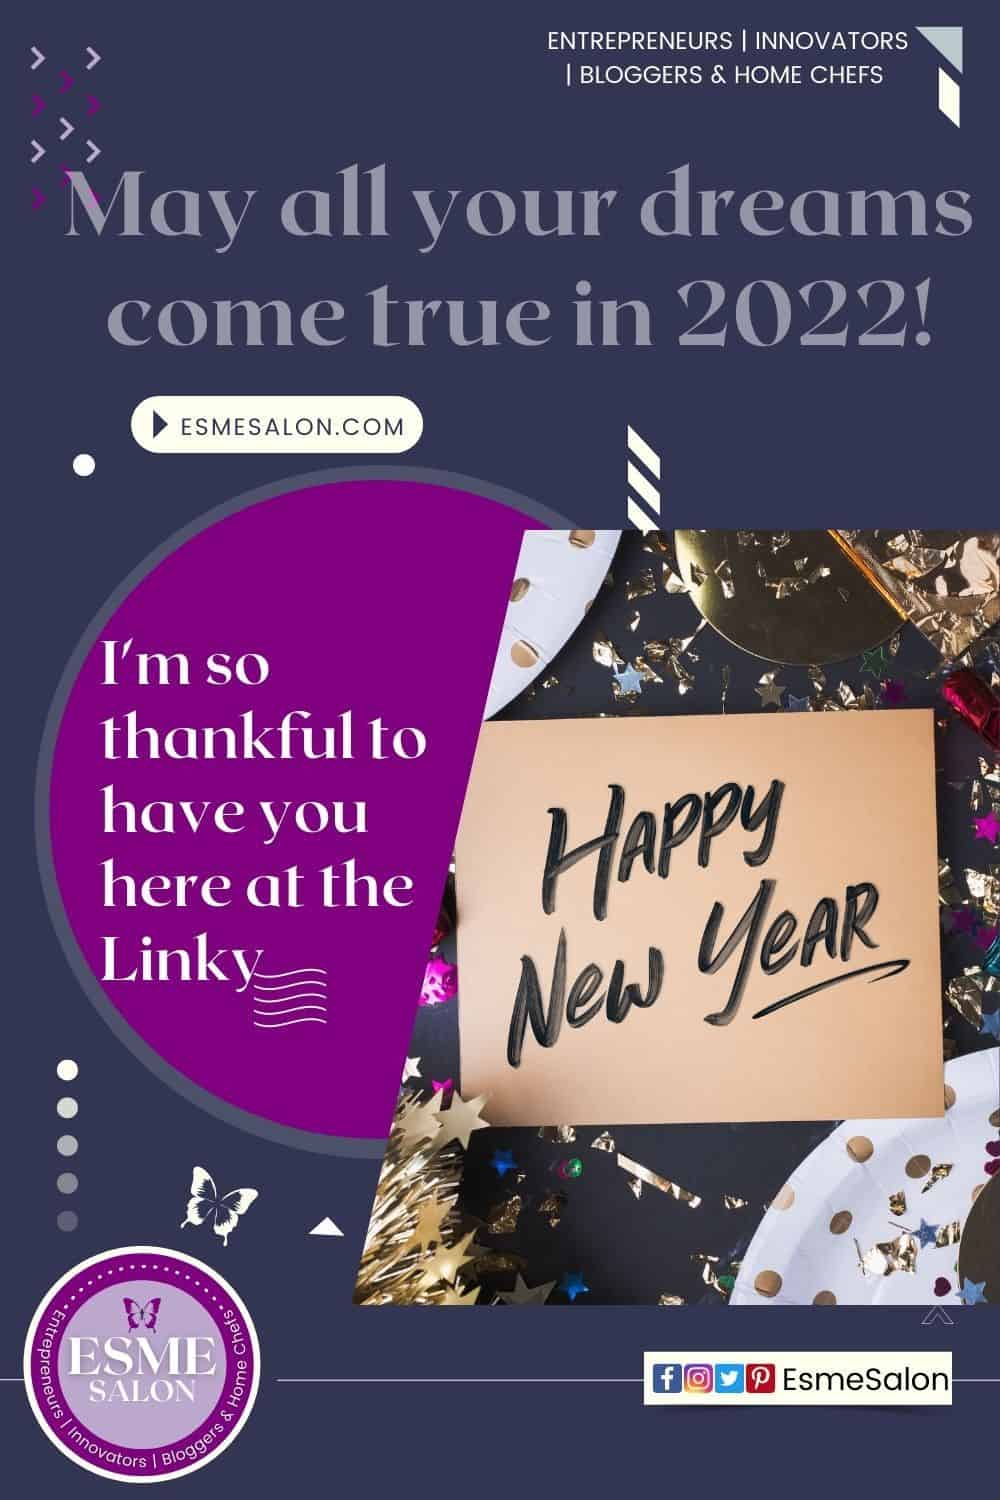 Grey background and saying: May all your dreams come true in 2022 with a light brown note "Happy New Year"